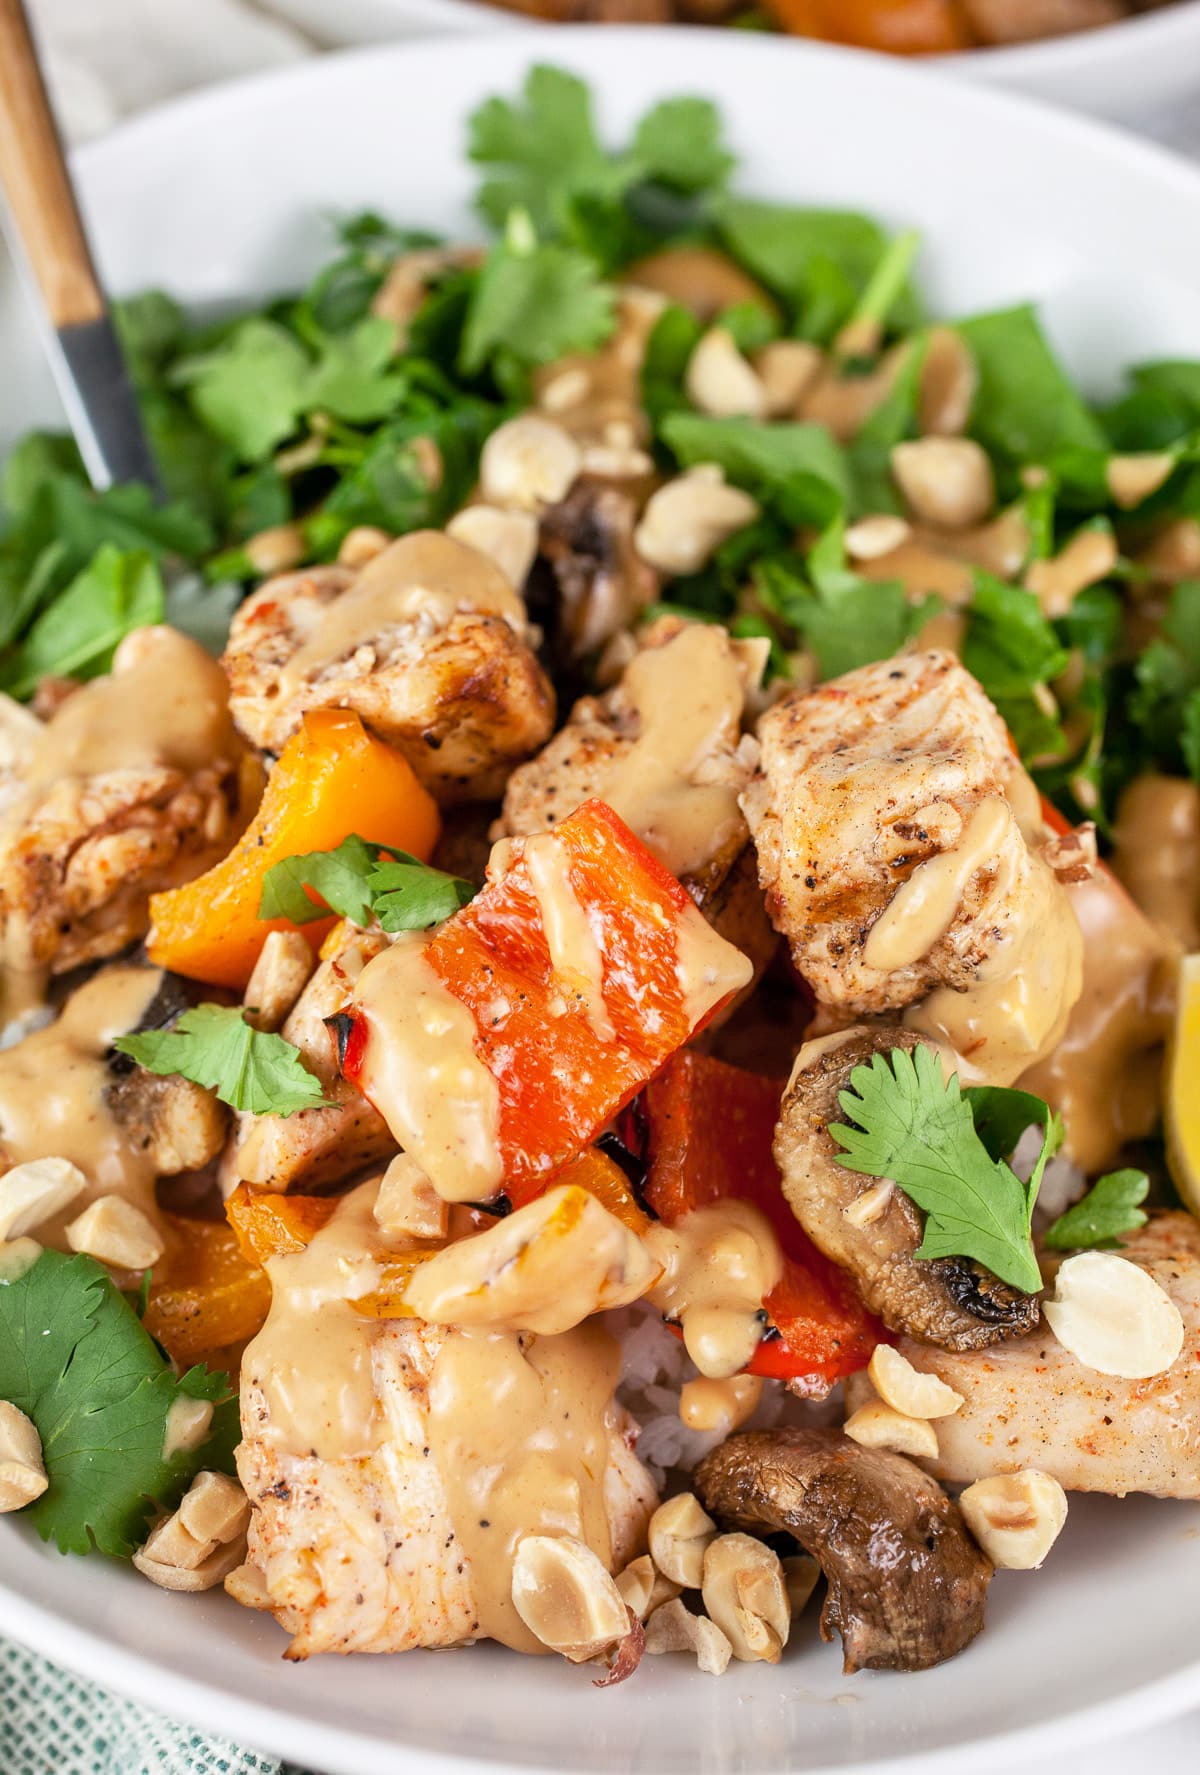 Thai grilled chicken bowl with fresh veggies and peanut sauce.